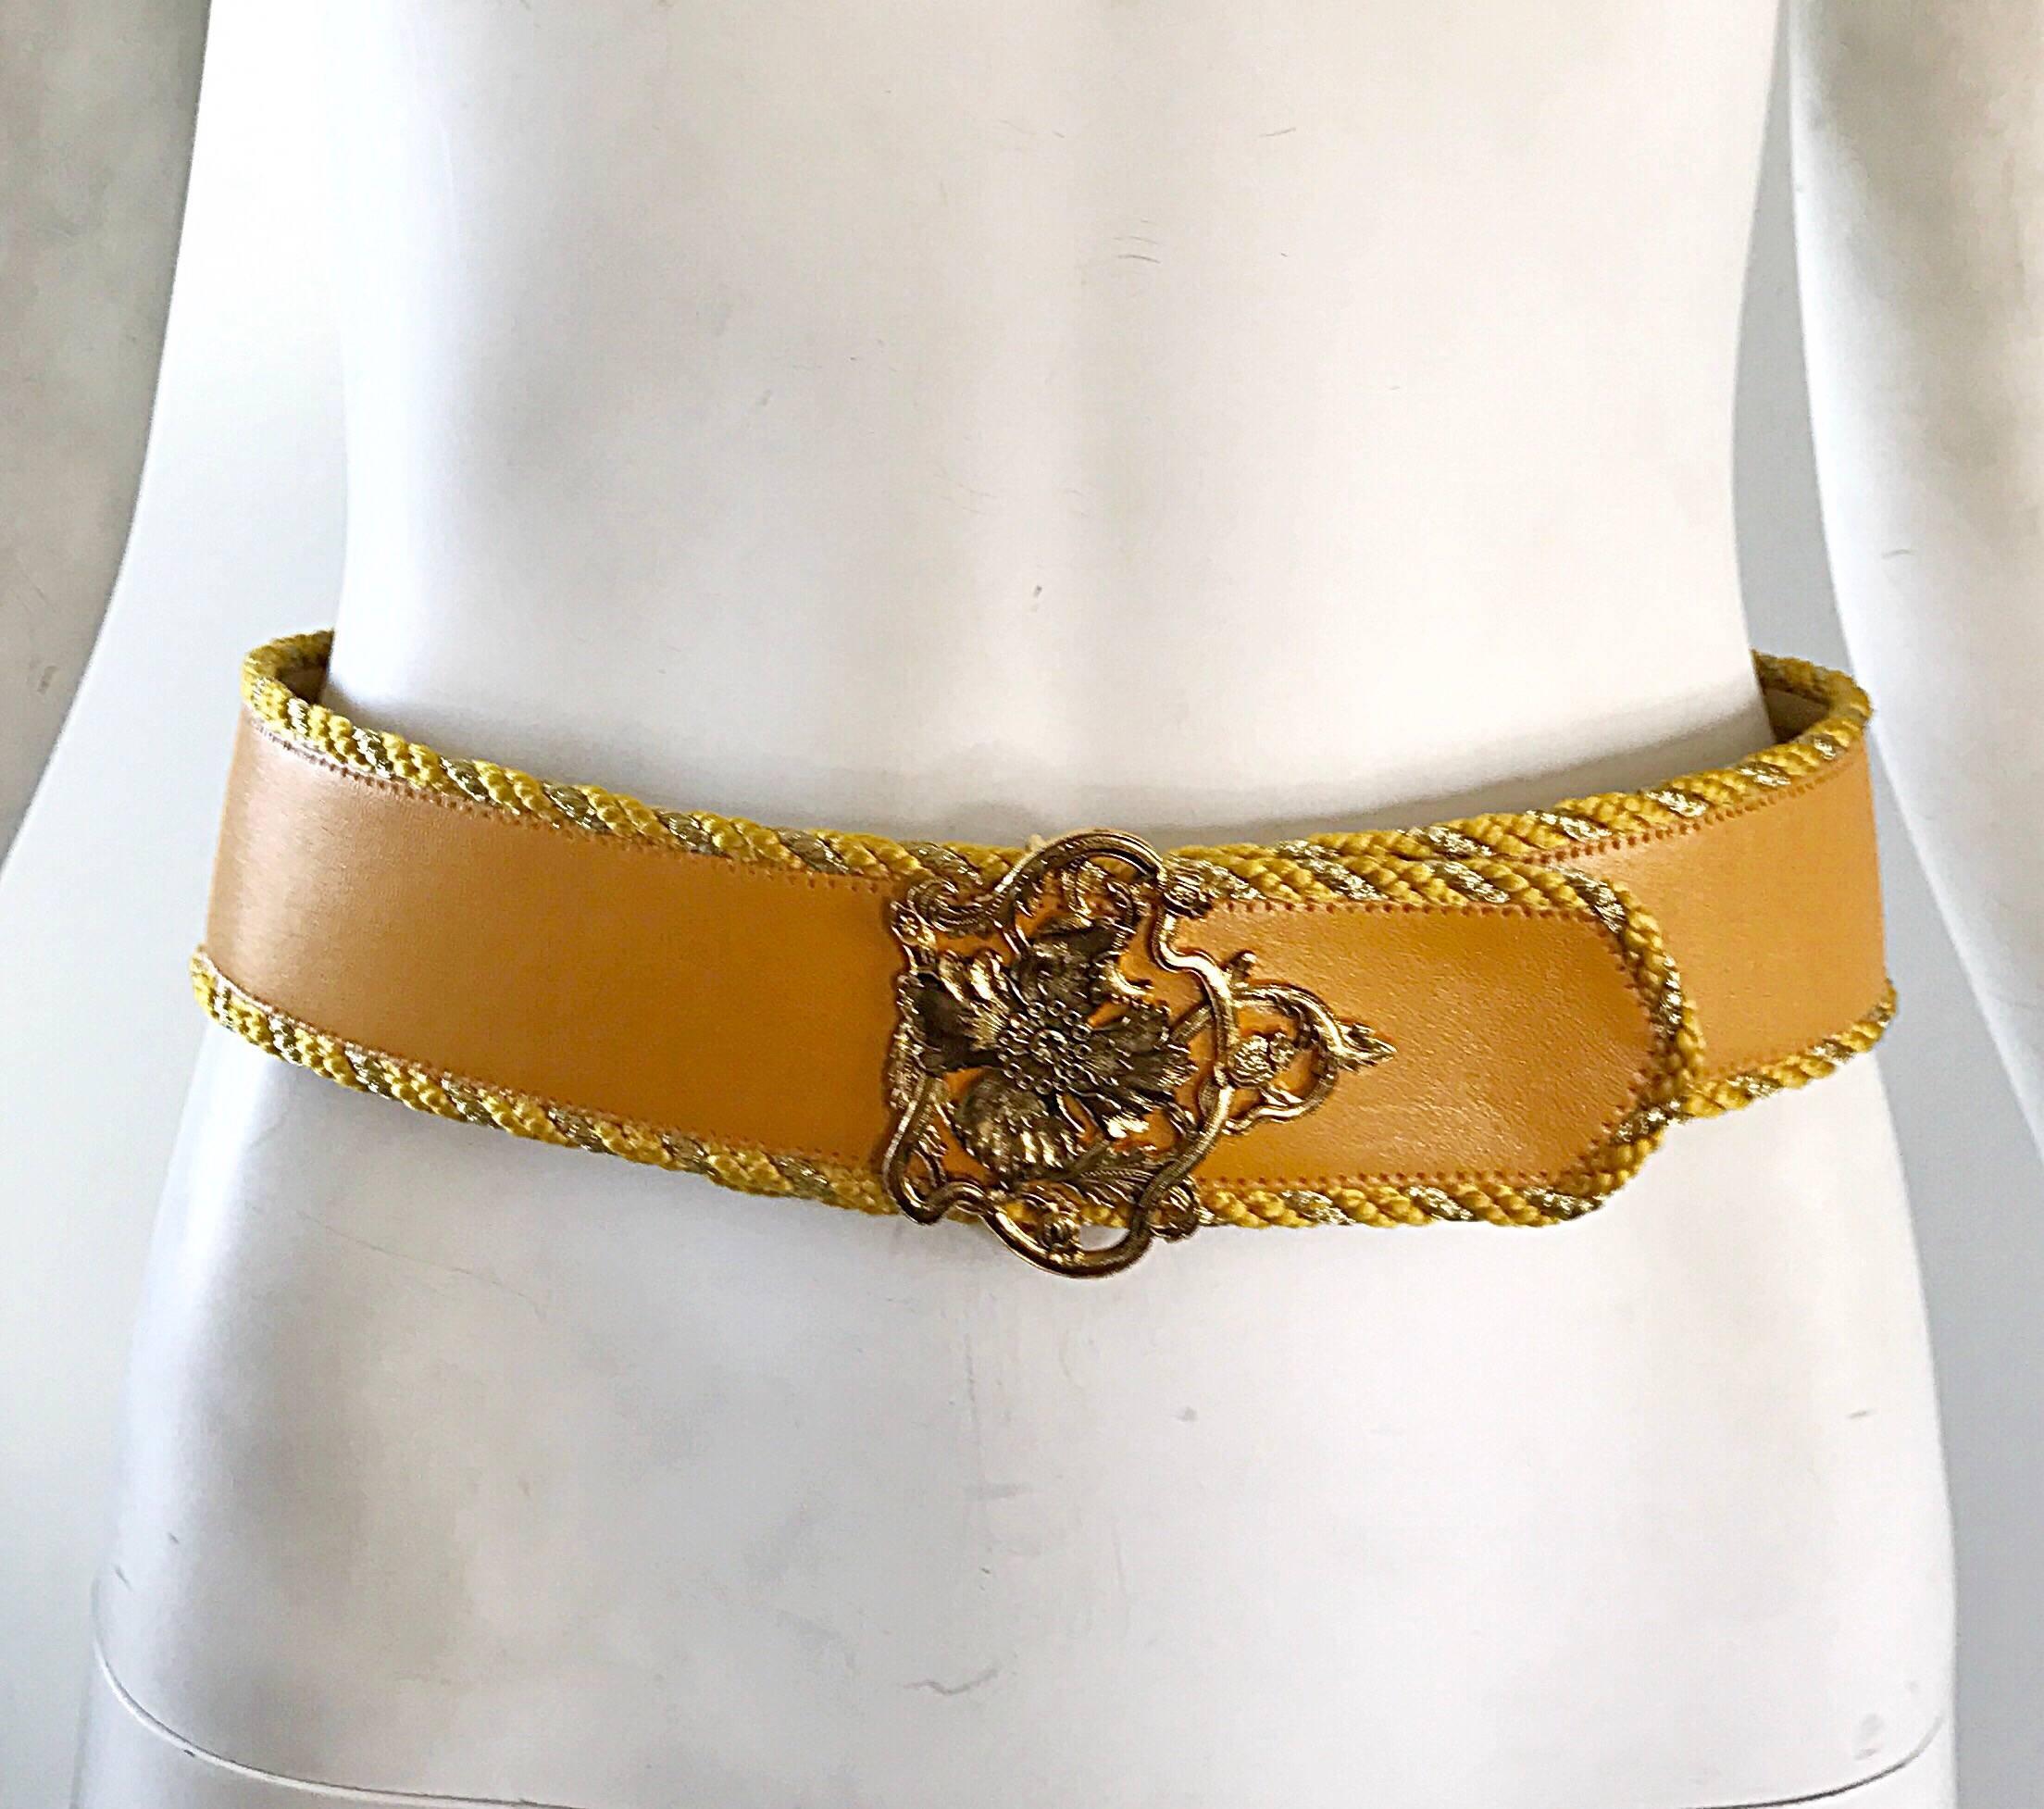 Beautiful 1990s EMANUEL UNGARO Marigold yellow and gold leather belt! Features a soft leather in a rich yellow color. Gold silk cording line the top and bottom of the belt. Gorgeous intricate gold flower buckle. The perfect accessory to add just the